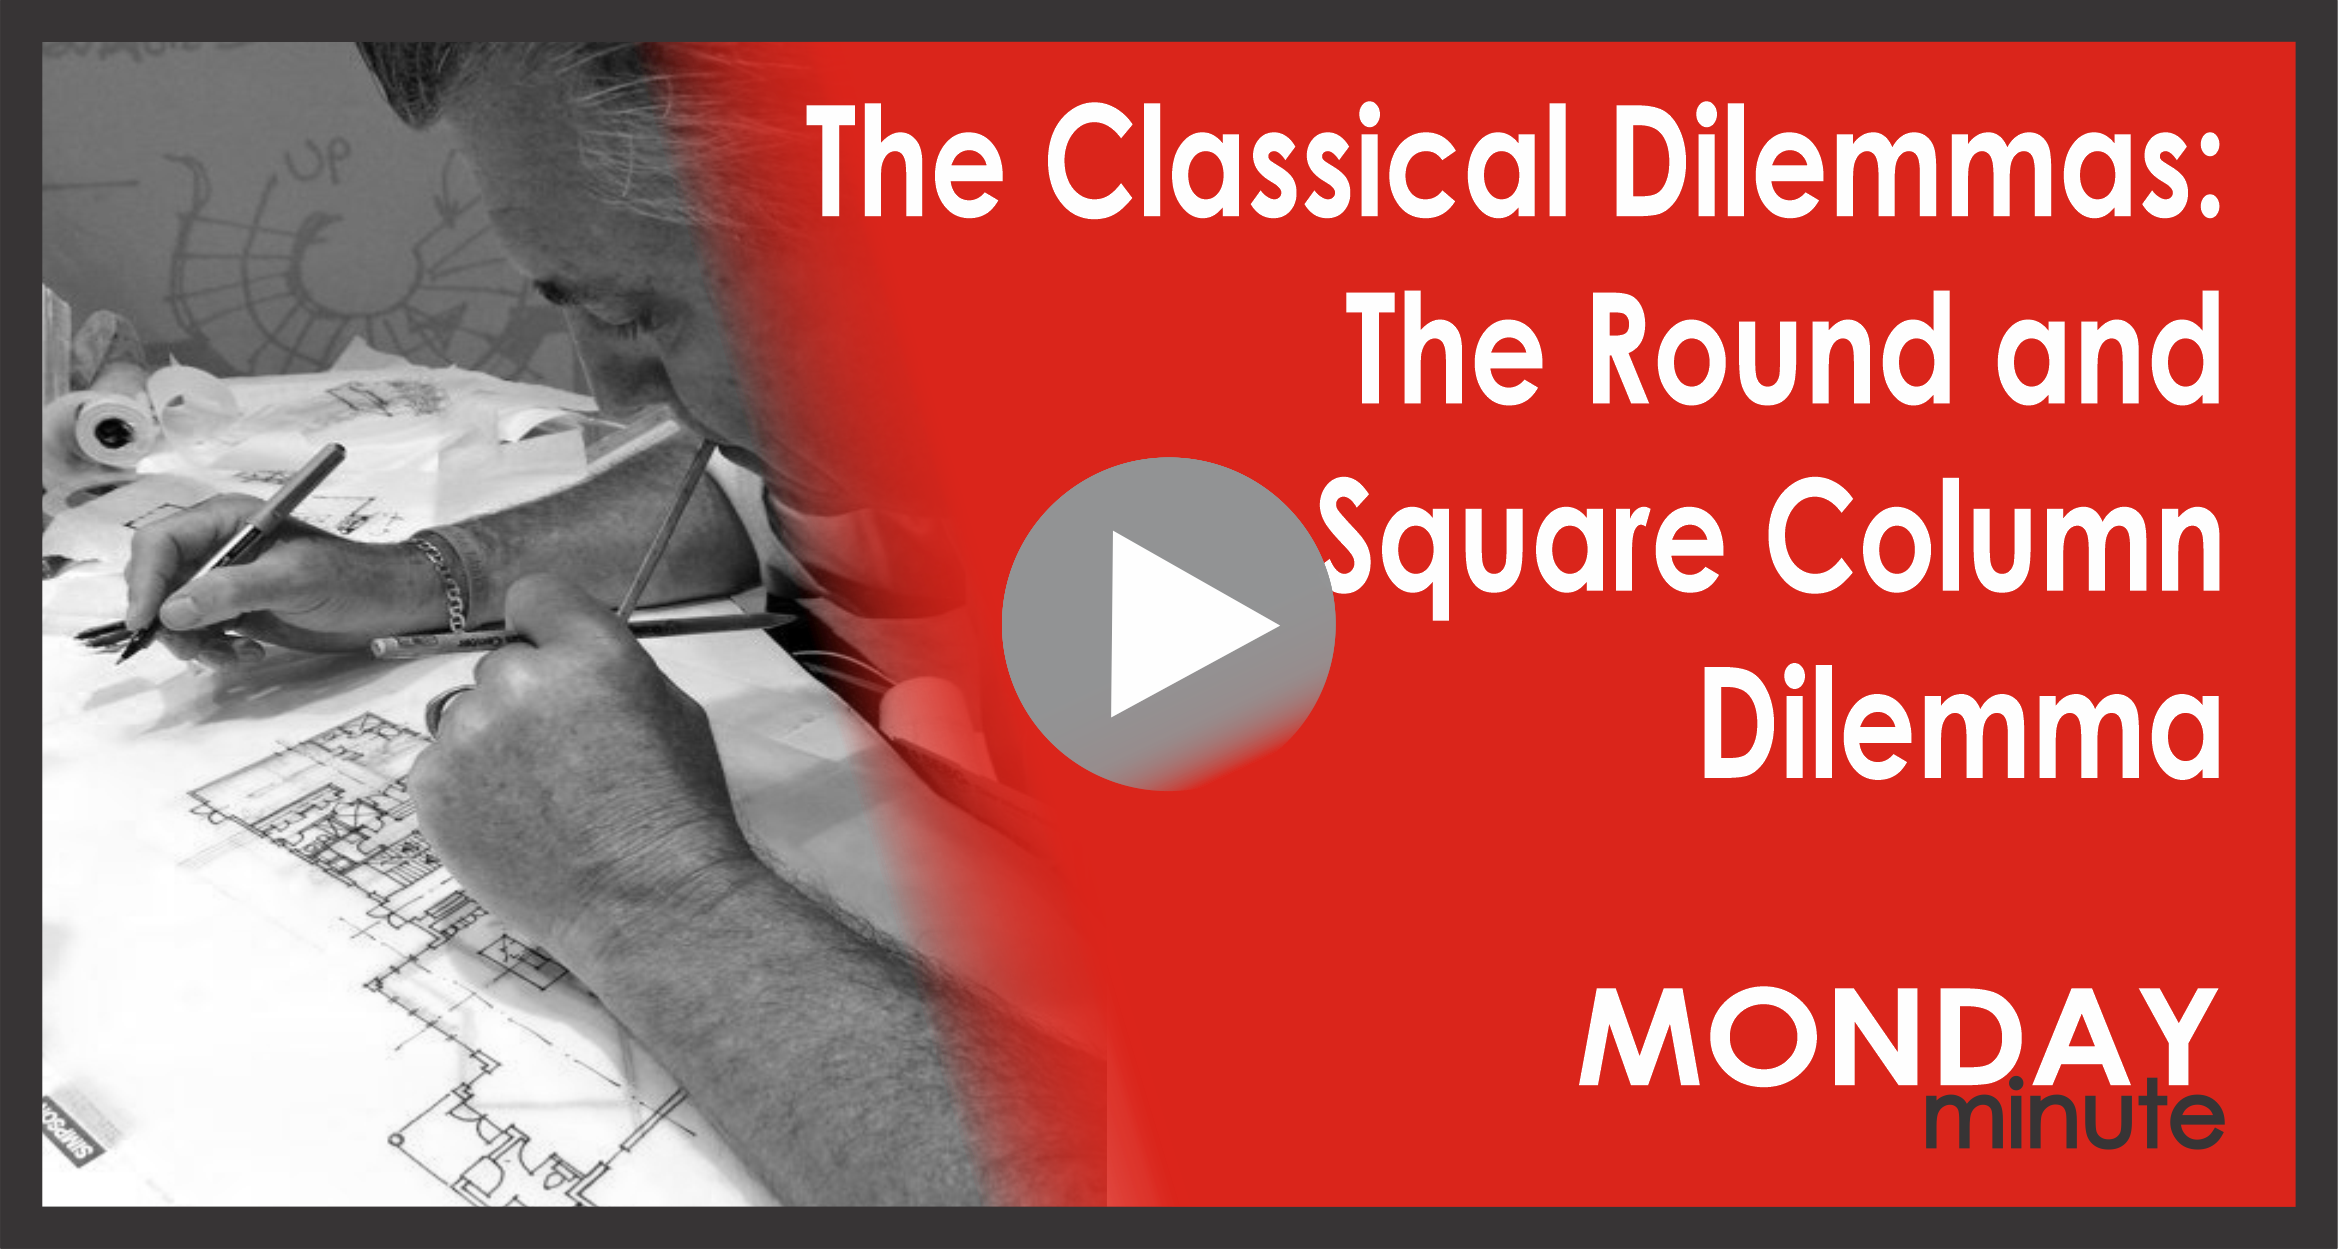 The Classical Dilemmas: The Round and Square Column Dilemma [Monday Minute]